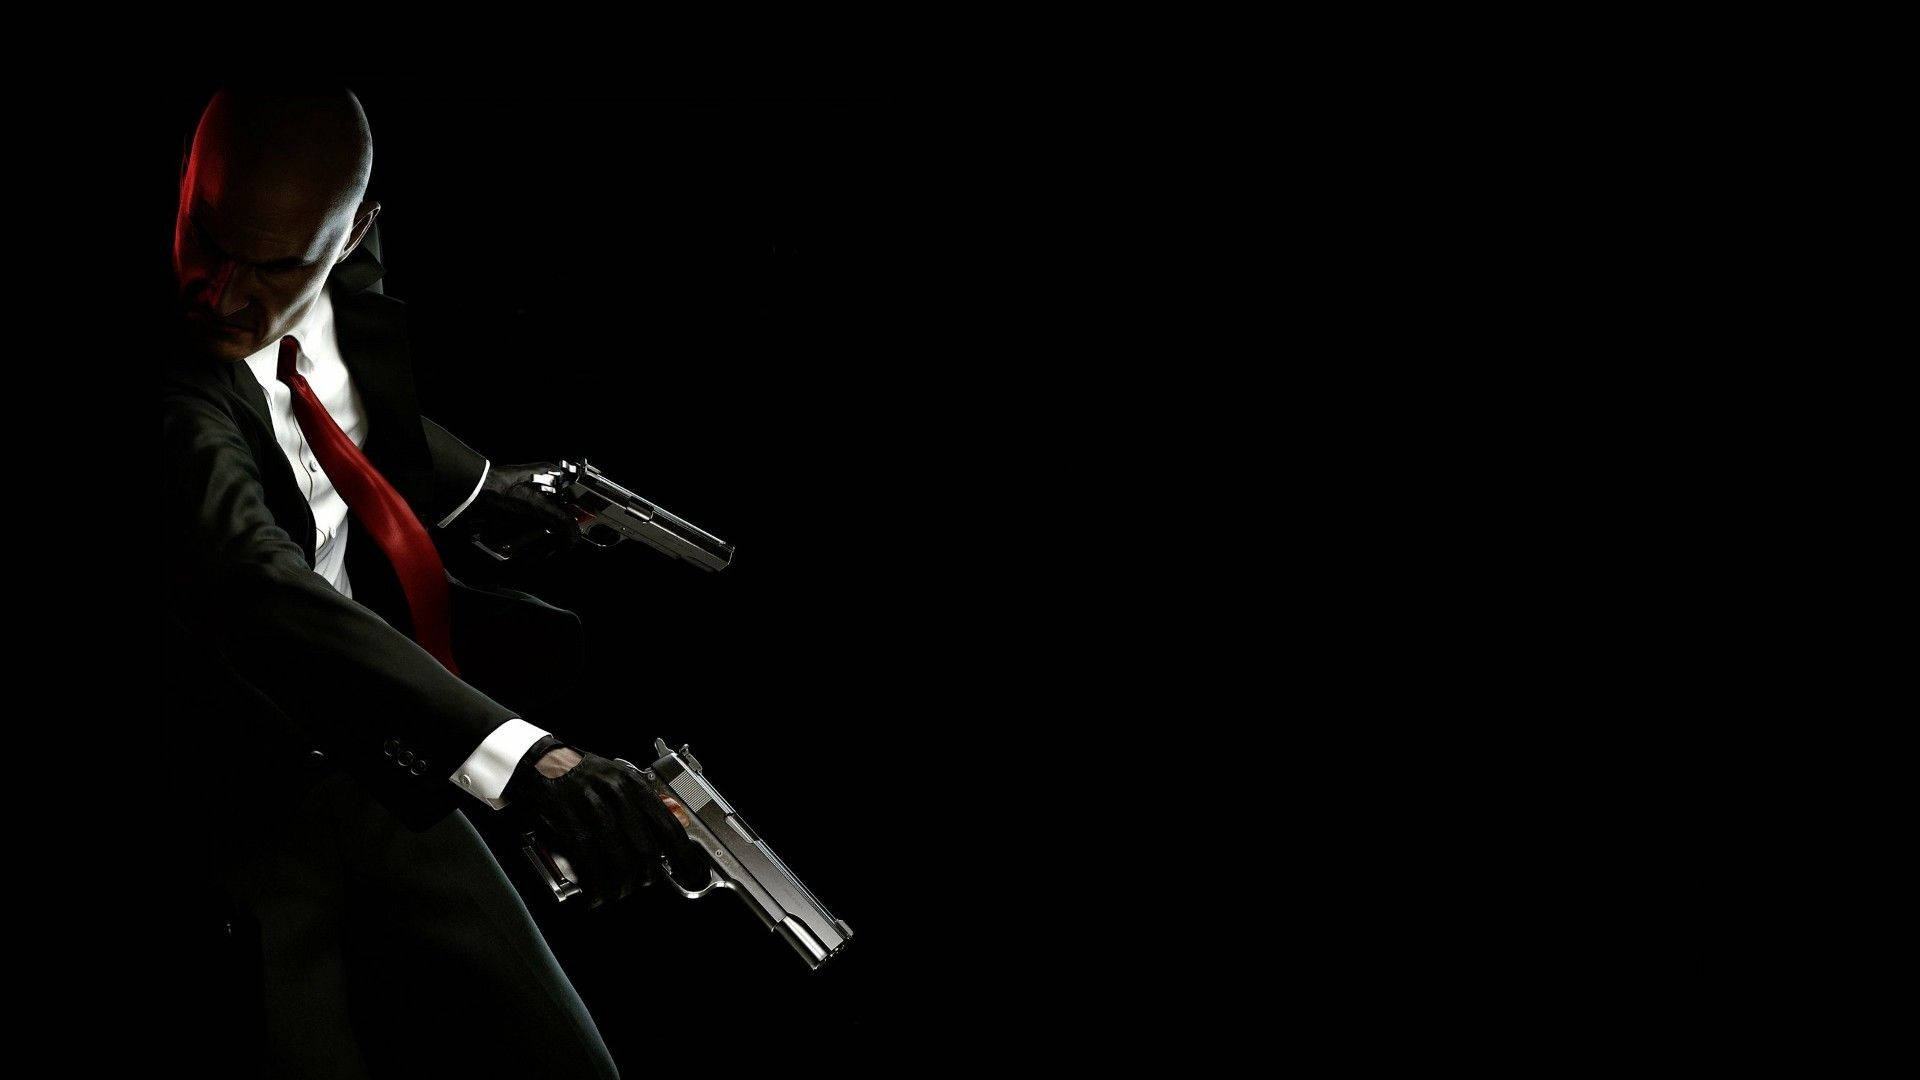 The mission is complete - Agent 47 a.k.a Real Hitman Wallpaper